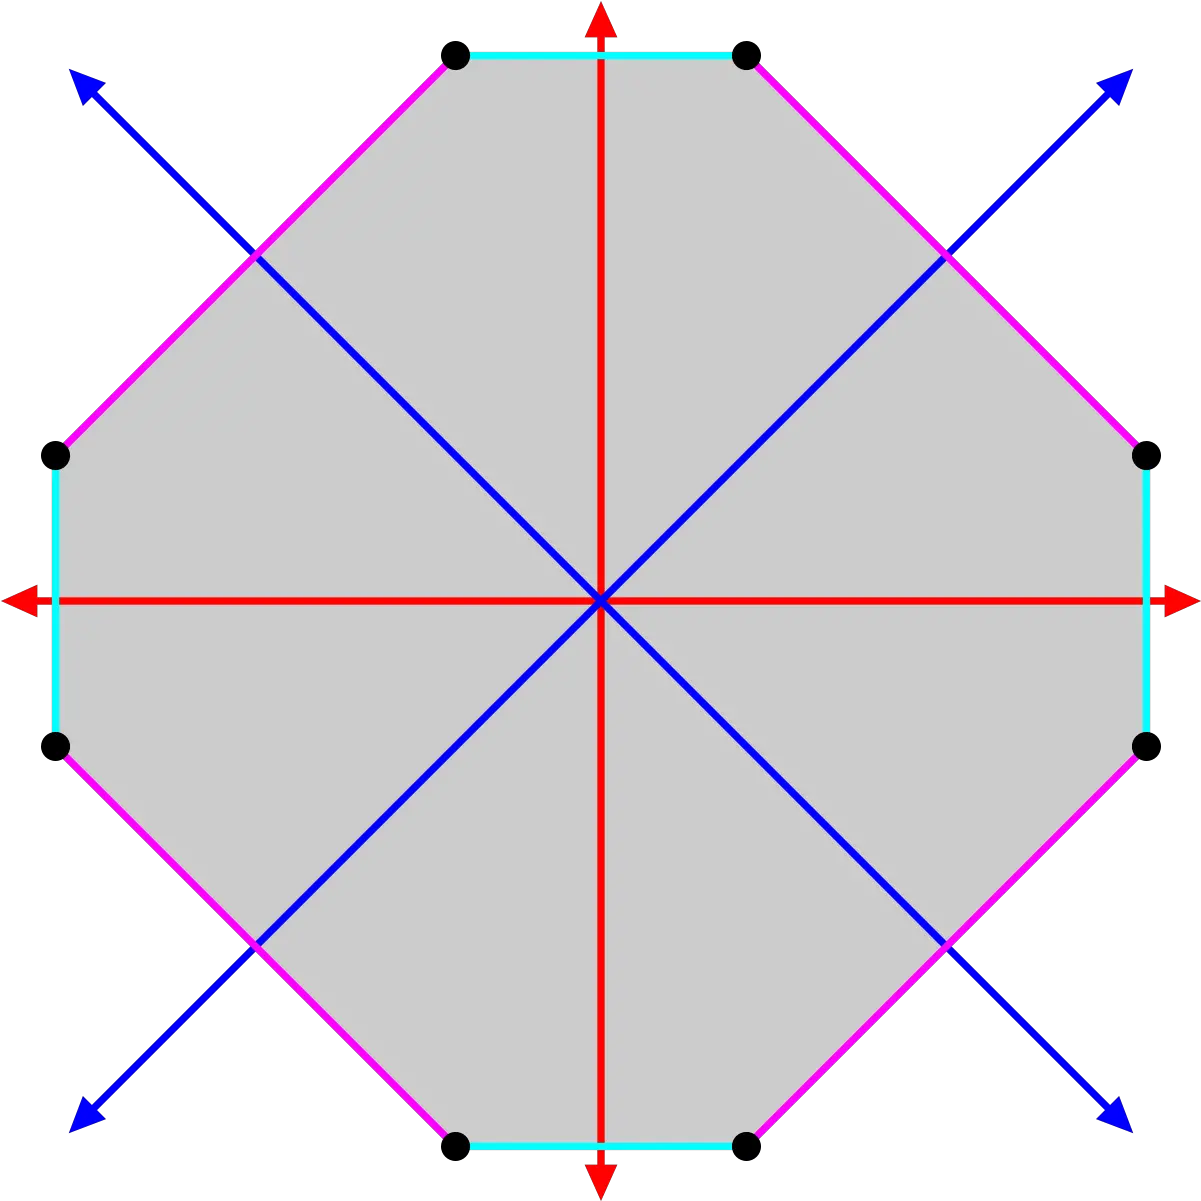 Filevertex Transitiveoctagonsvg Wikimedia Commons Diagram Png Octagon Png